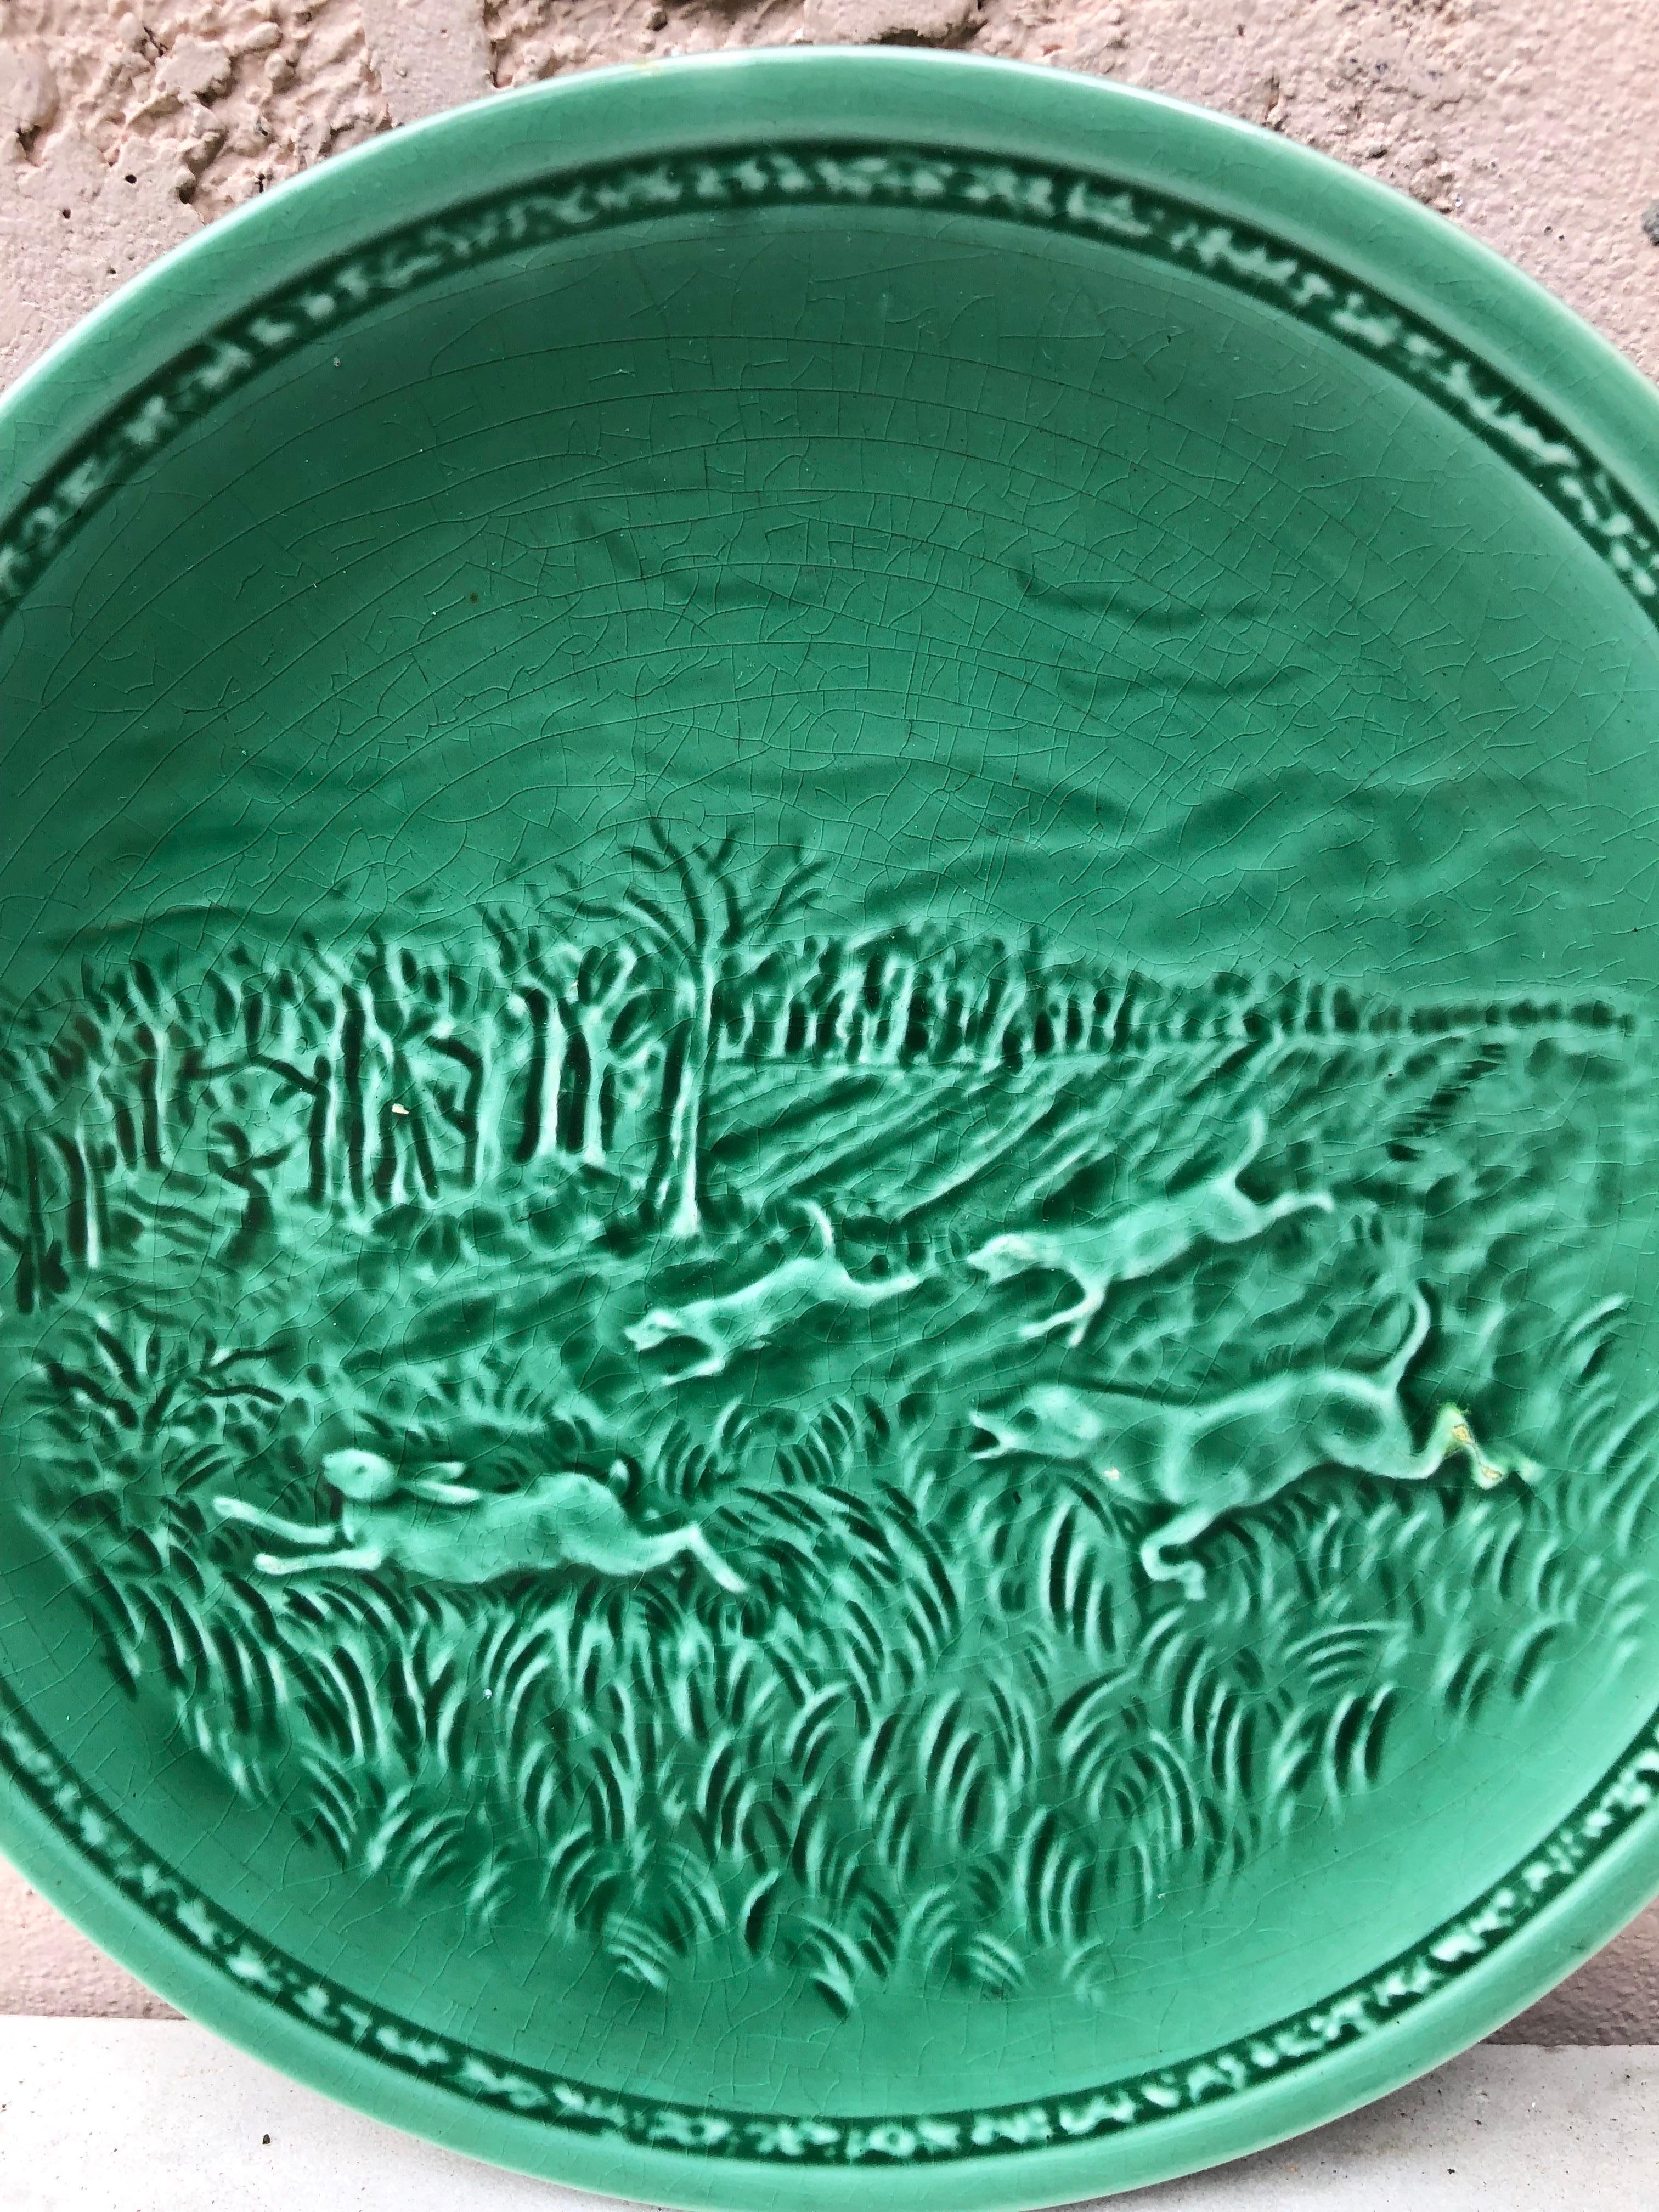 French green Majolica hare and hunting dog plate signed Sarreguemines, circa 1920.
2 plates available.